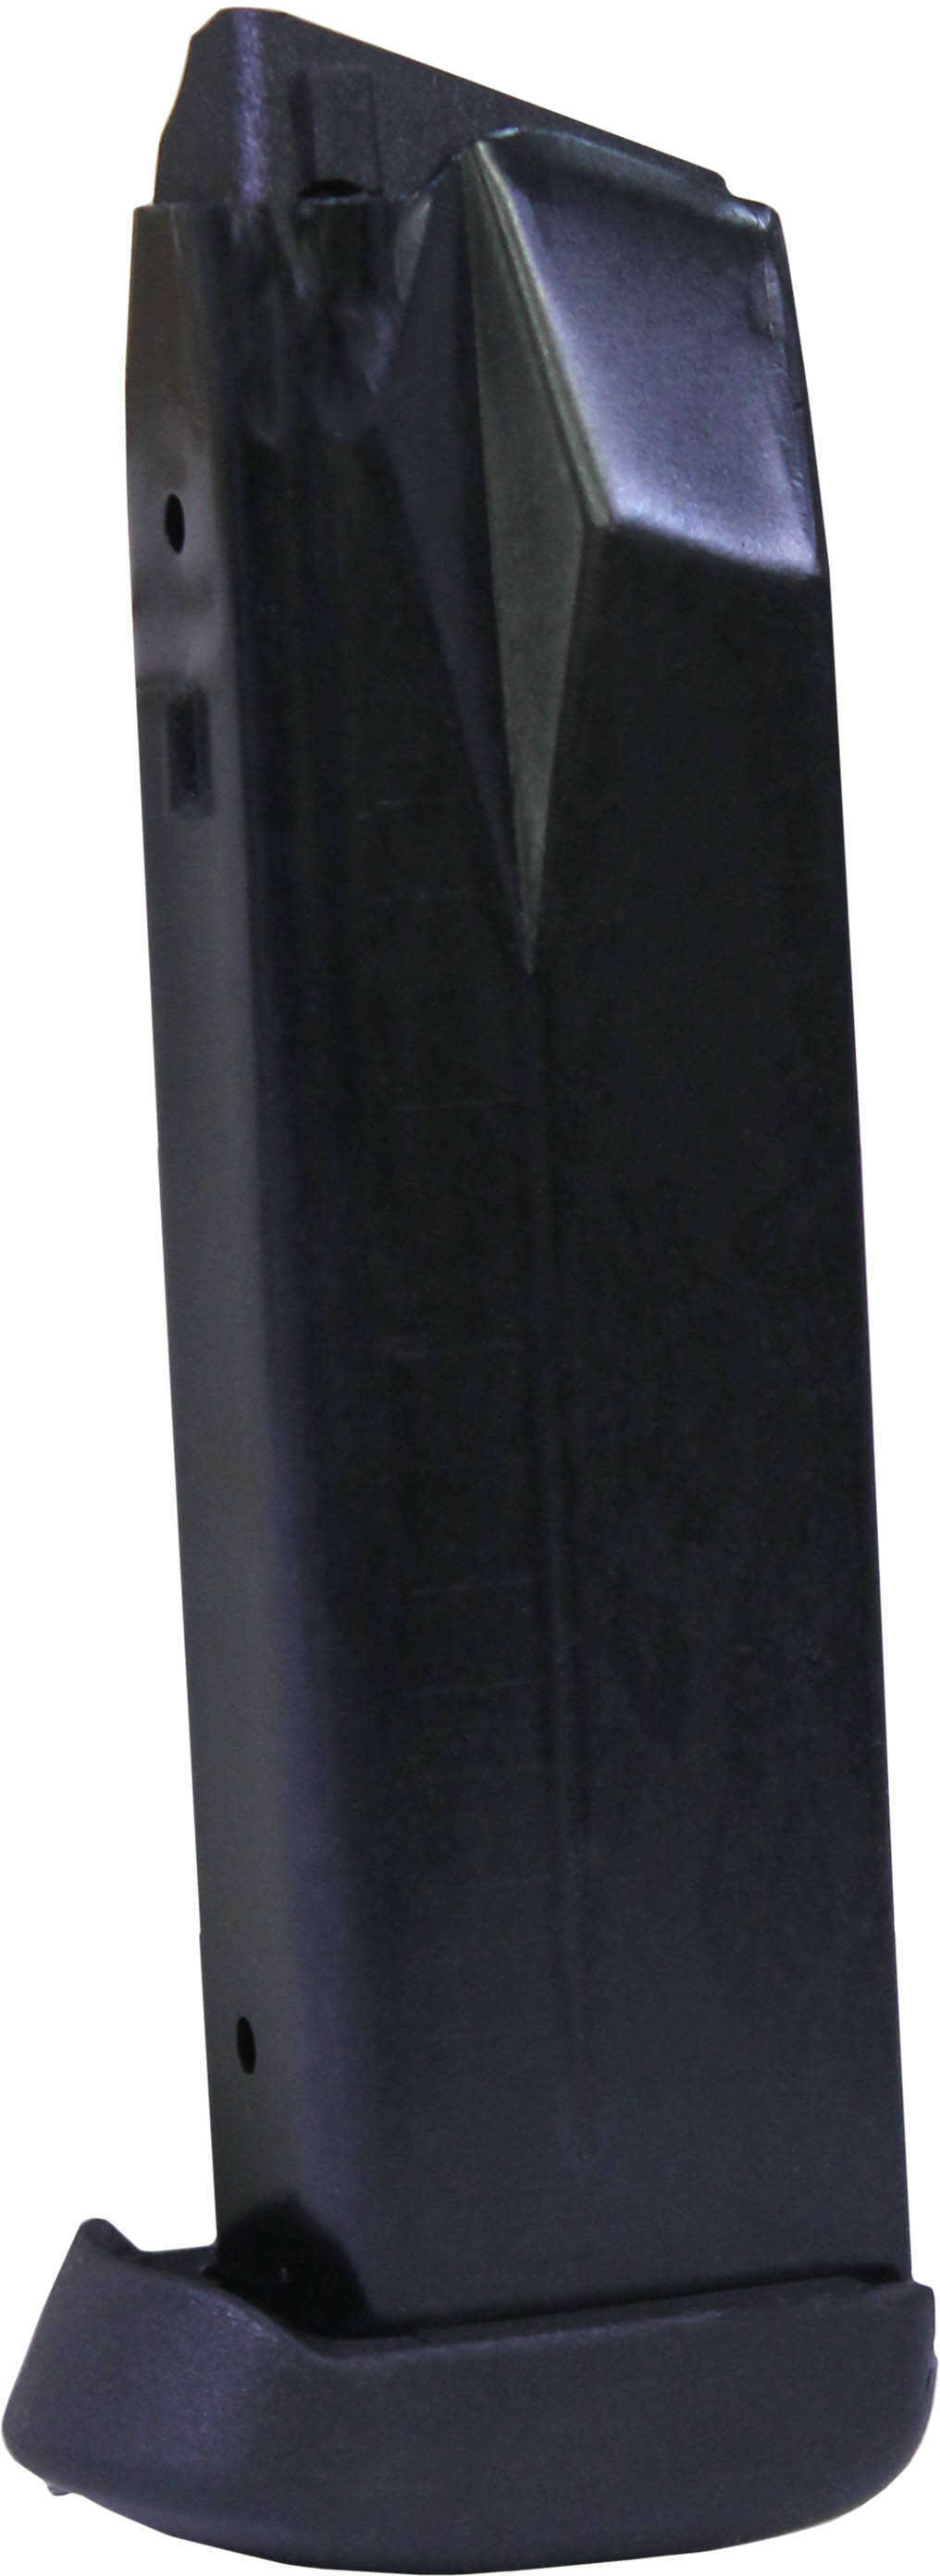 ProMag FNH FNX45 .45 ACP Magazine, 13 Rounds, Blue Steel Md: FNH-A5